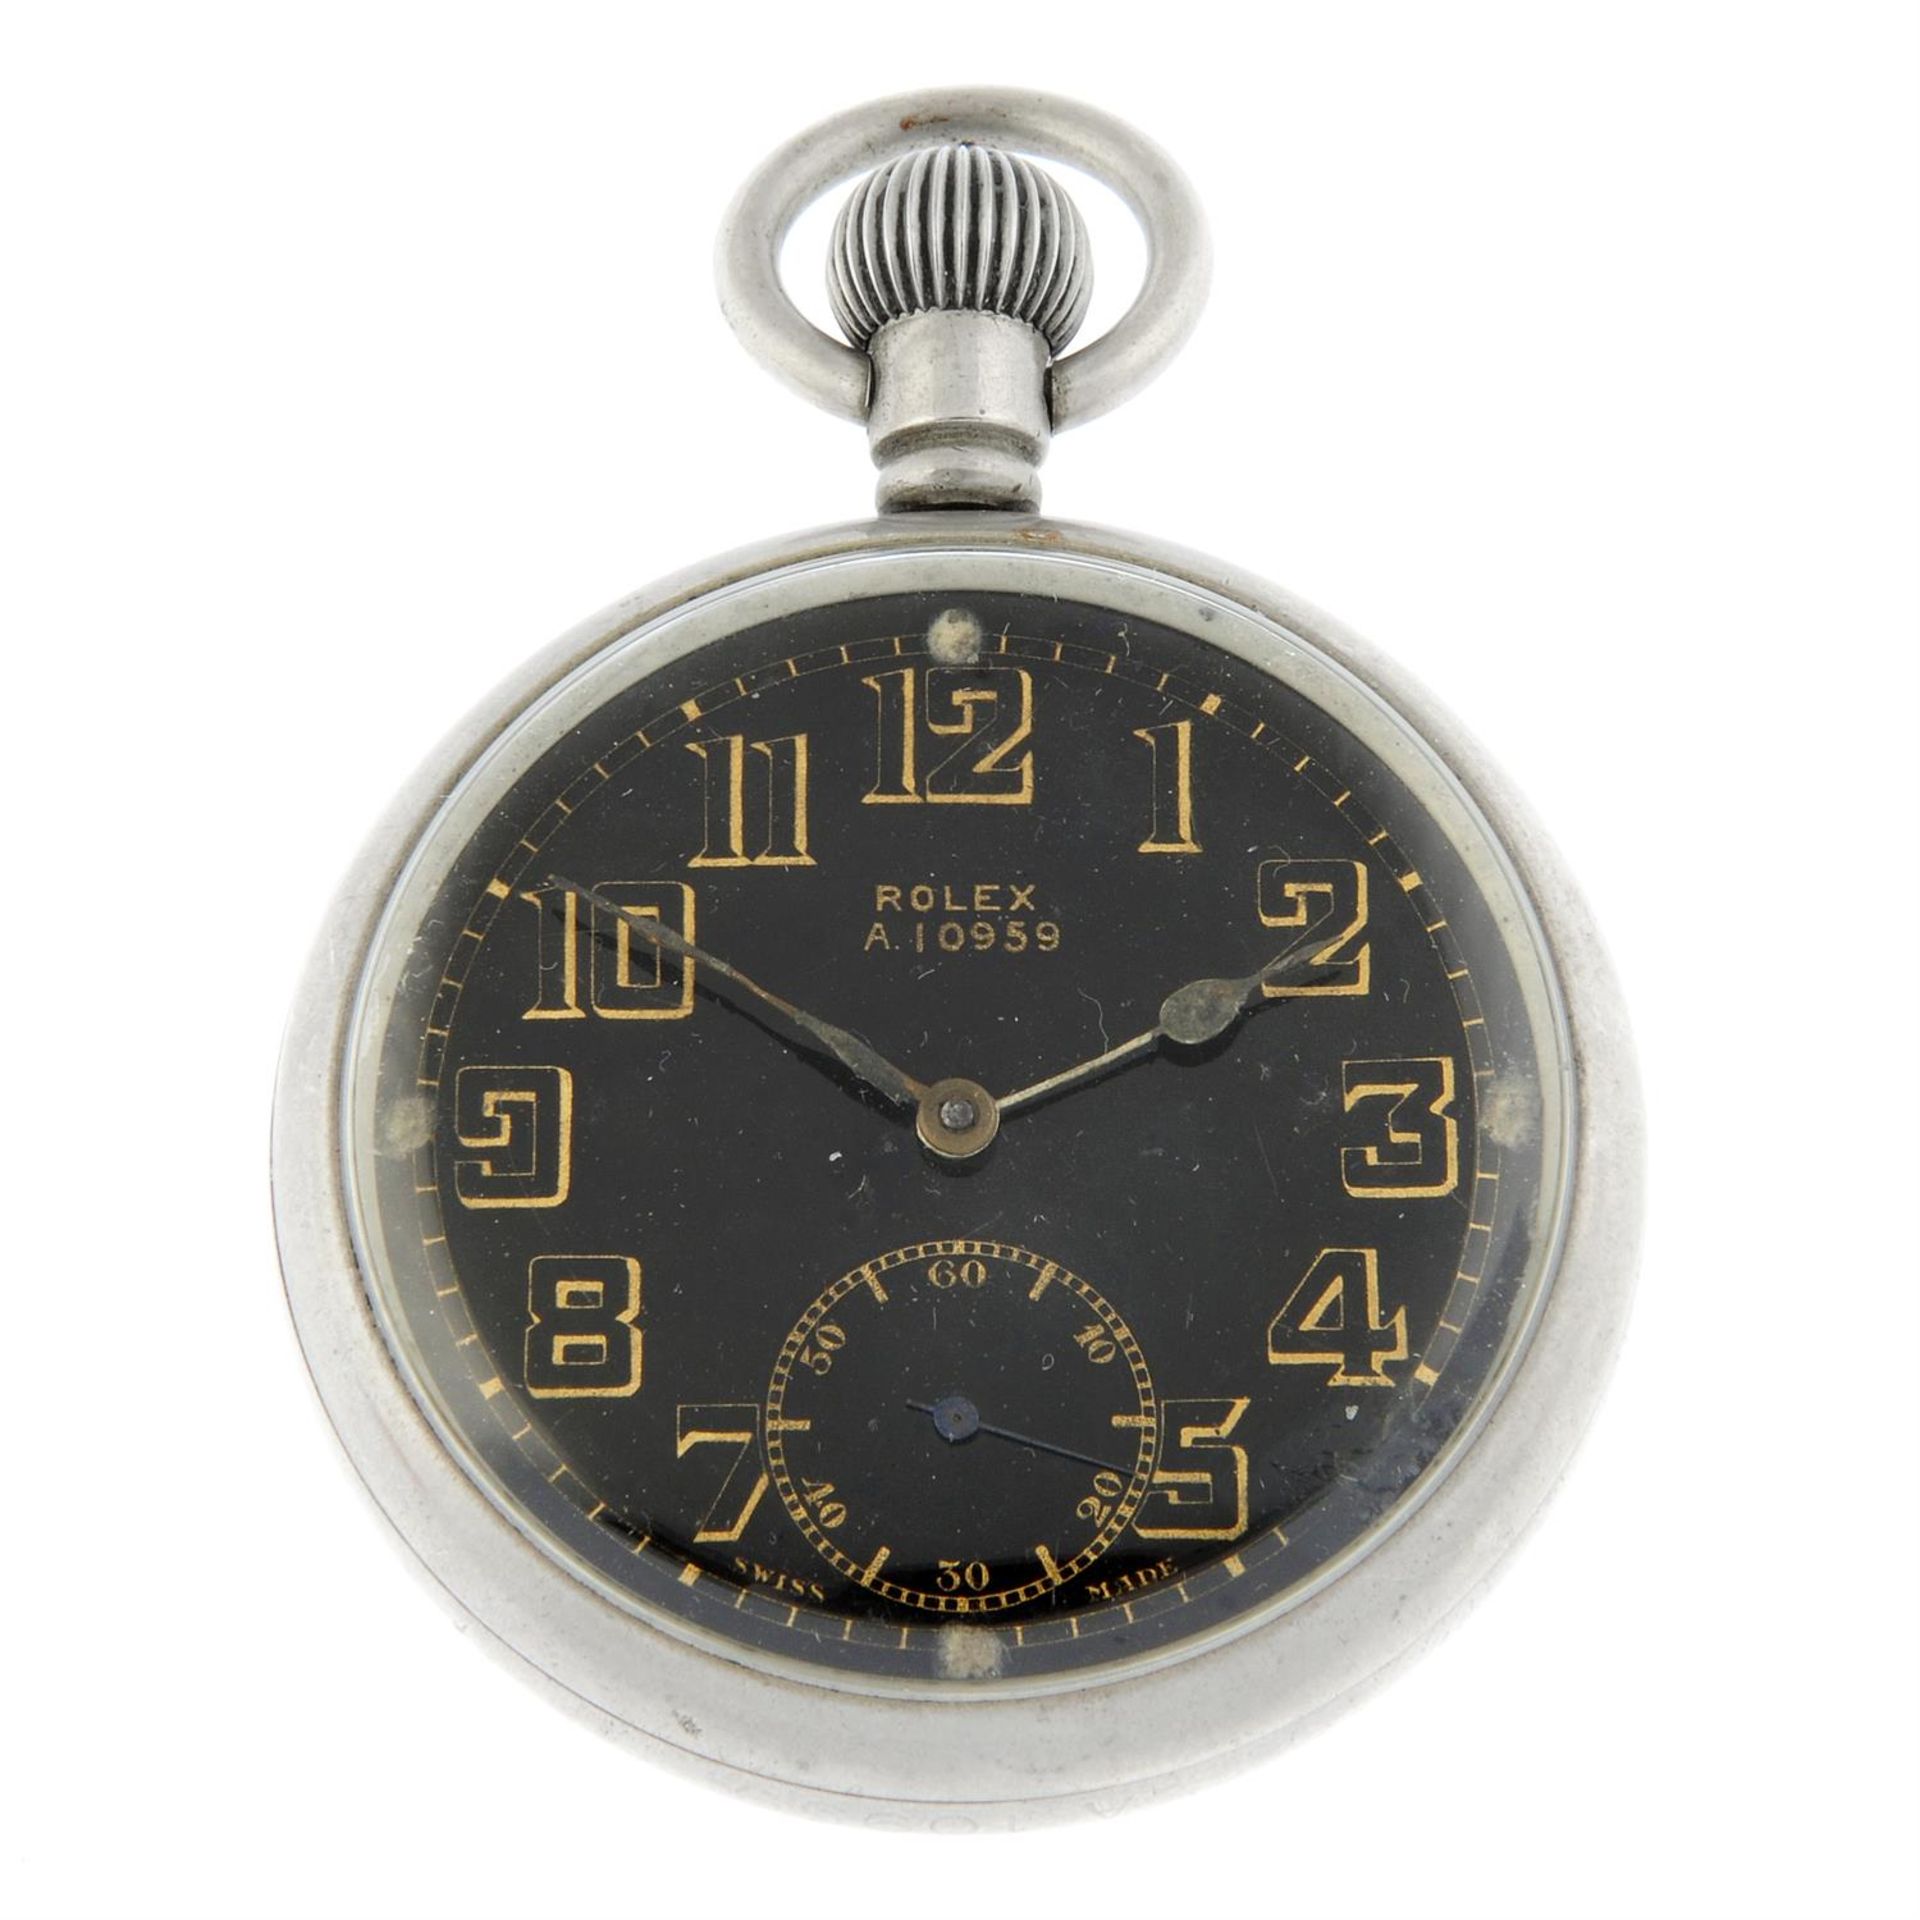 An open face military issue pocket watch, 50mm.